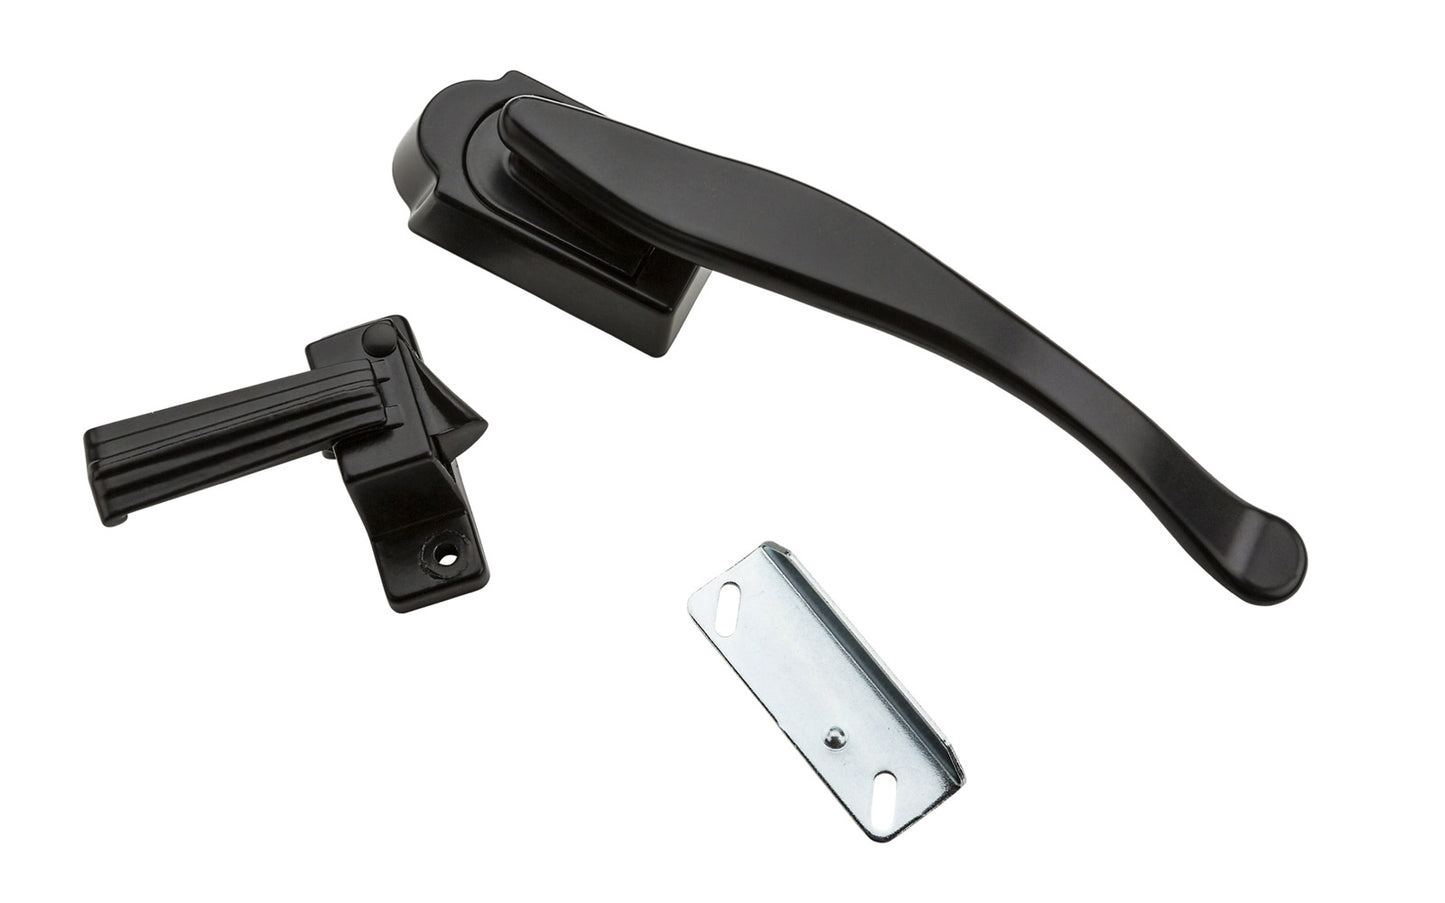 This Black Lever Screen/Storm Lift Latch is a lift latch designed to fit doors from 3/4" to 1-1/4" thick. Made of die-cast material with a black finish. National Hardware Model No. N100-034. 886780013399